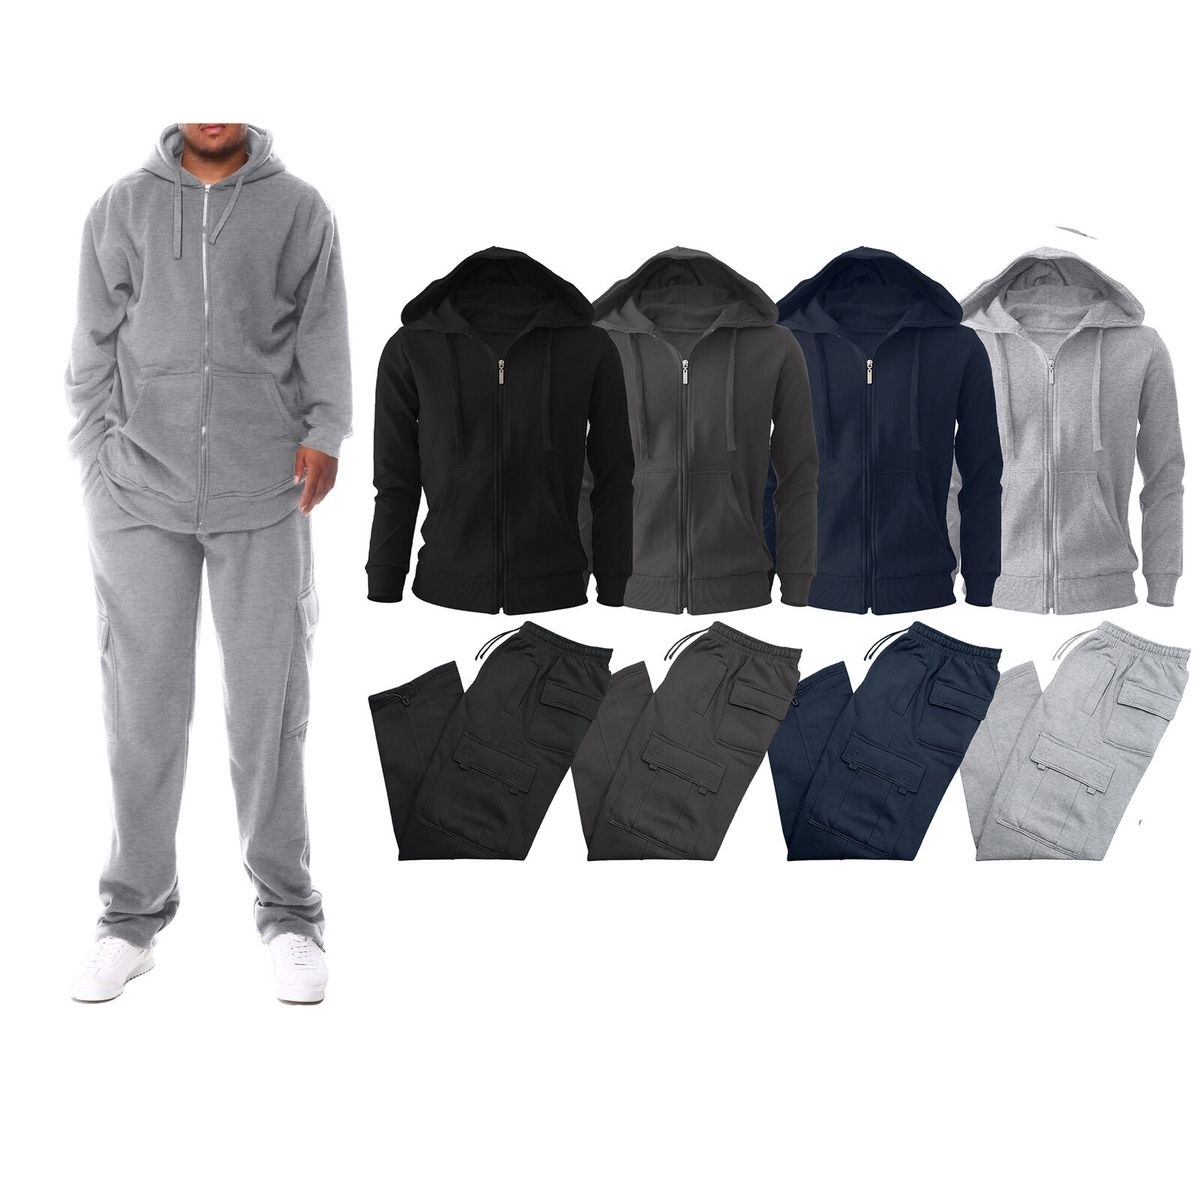 Men's Big & Tall Winter Warm Athletic Active Cozy Fleece Lined Multi-Pocket Full Zip Up Cargo Tracksuit - Black, X-large